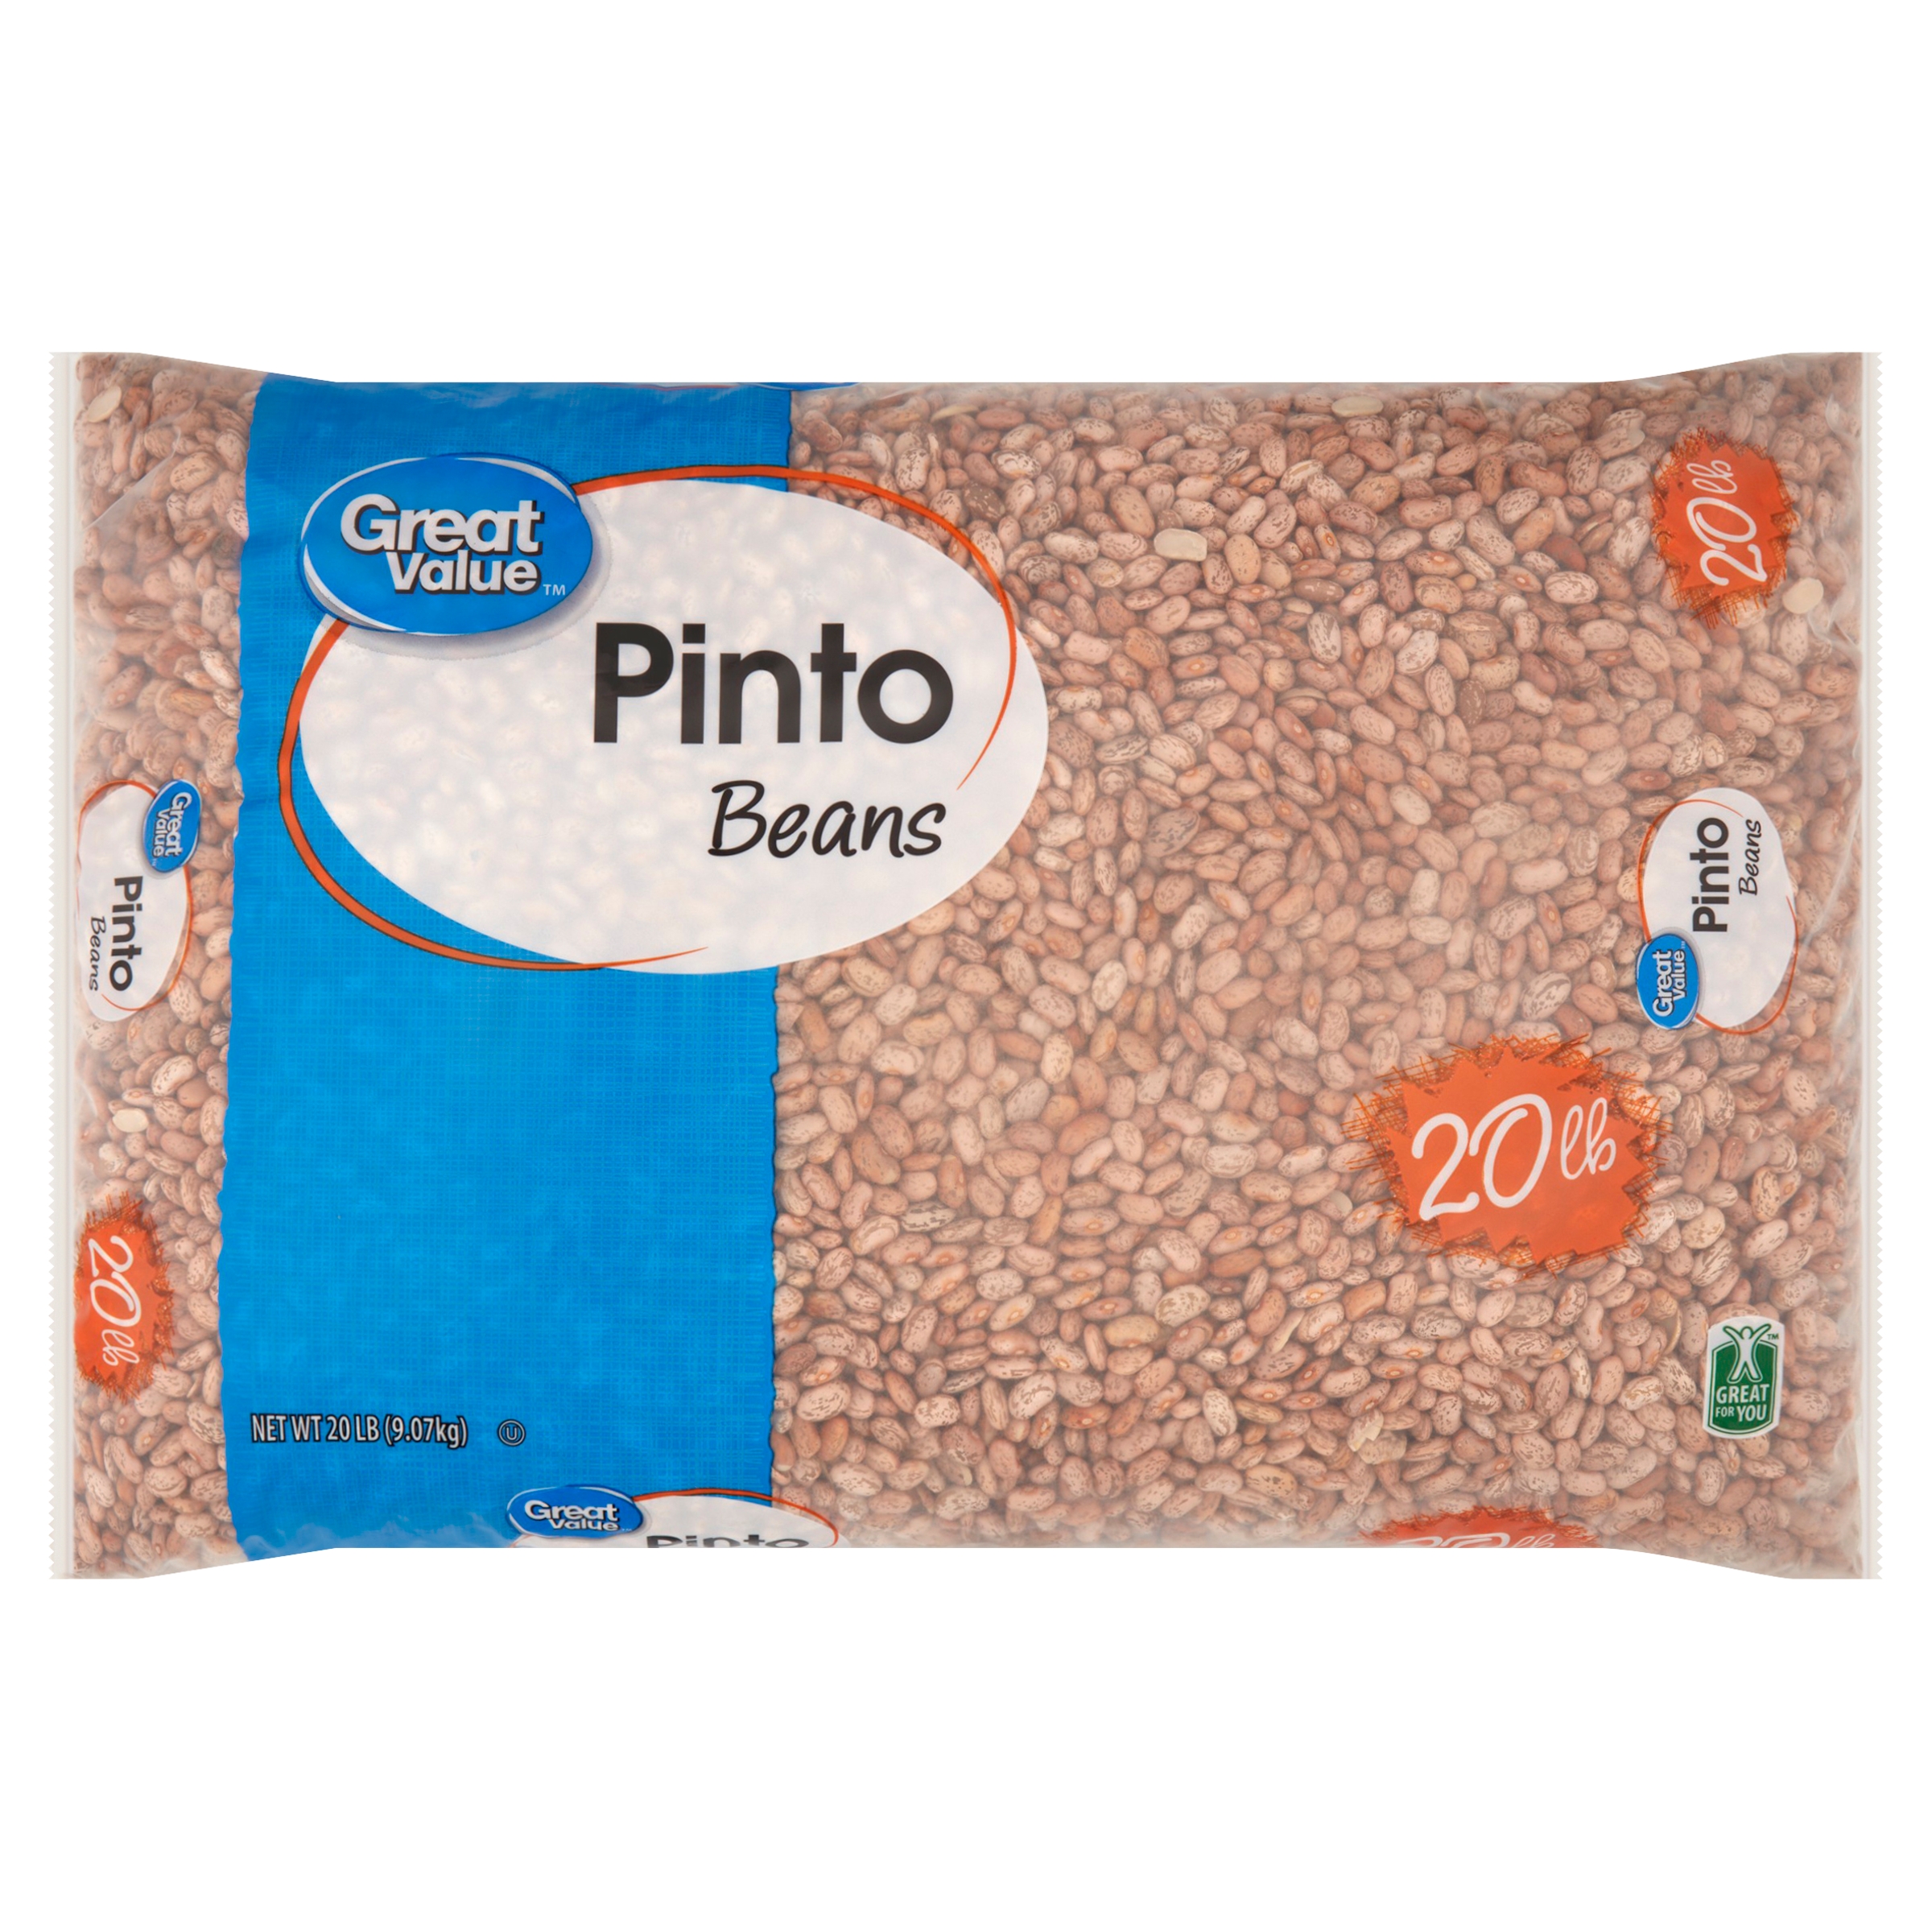 Great Value Pinto Beans, 20 lb - image 1 of 8